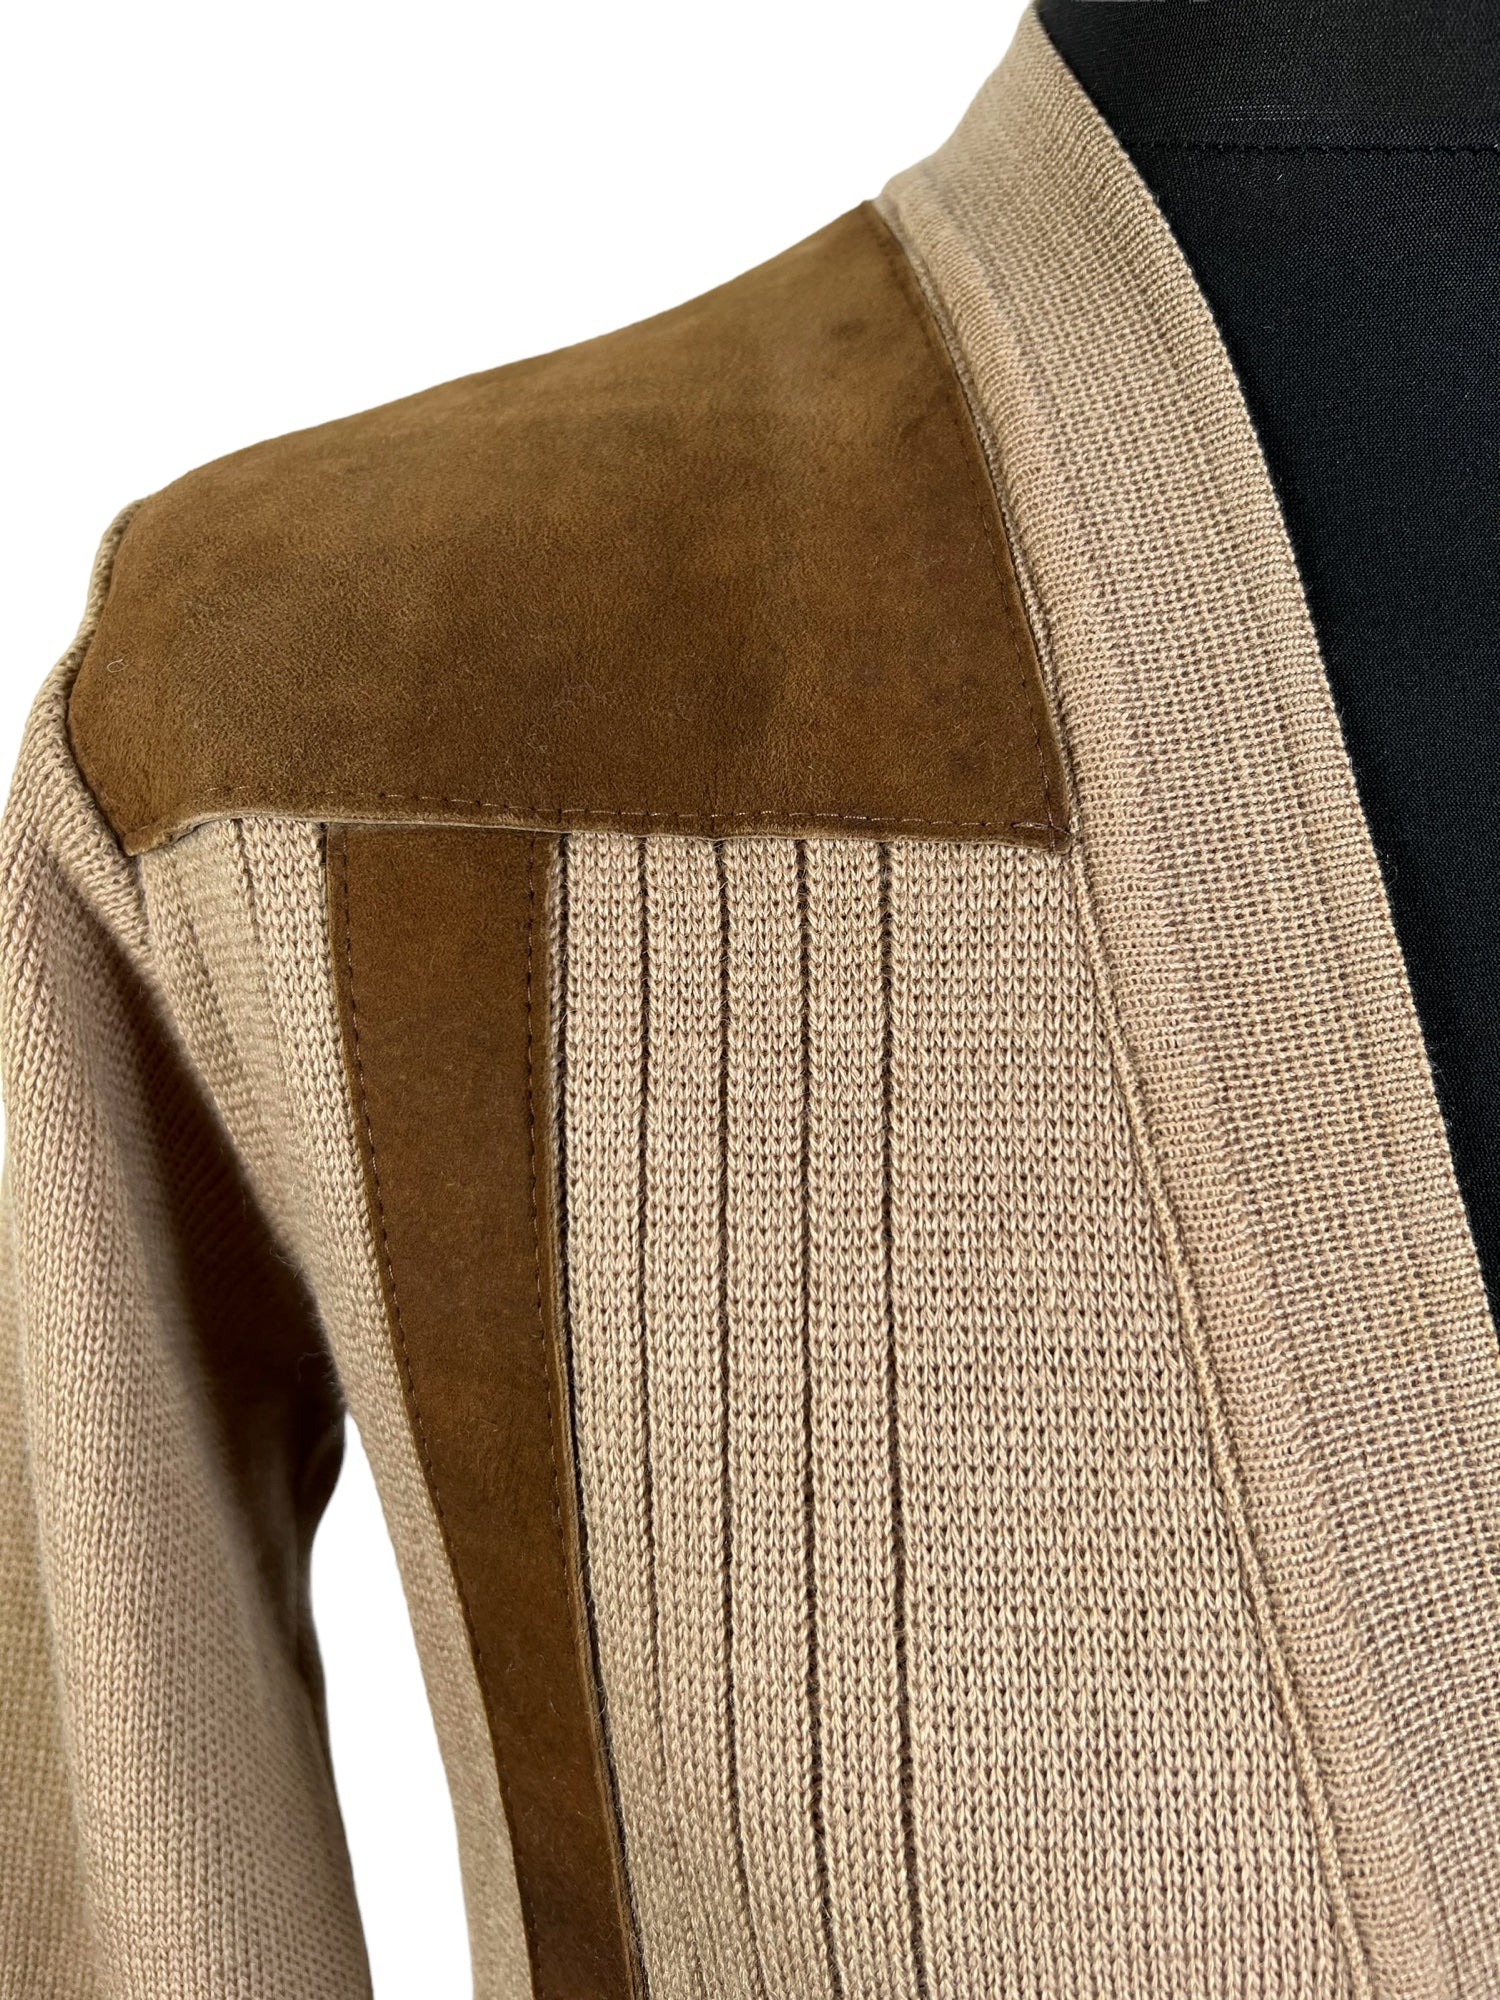 vintage  Urban Village Vintage  urban village  UK  sweater  Suede detail  Suede  style  S  Ribbed  mens  long sleeves  long sleeve  knitwear  Kilspindie  jacket  fashion  clothing  clothes  cardigan  cardi  button  brown  birmingham  70s  1970s